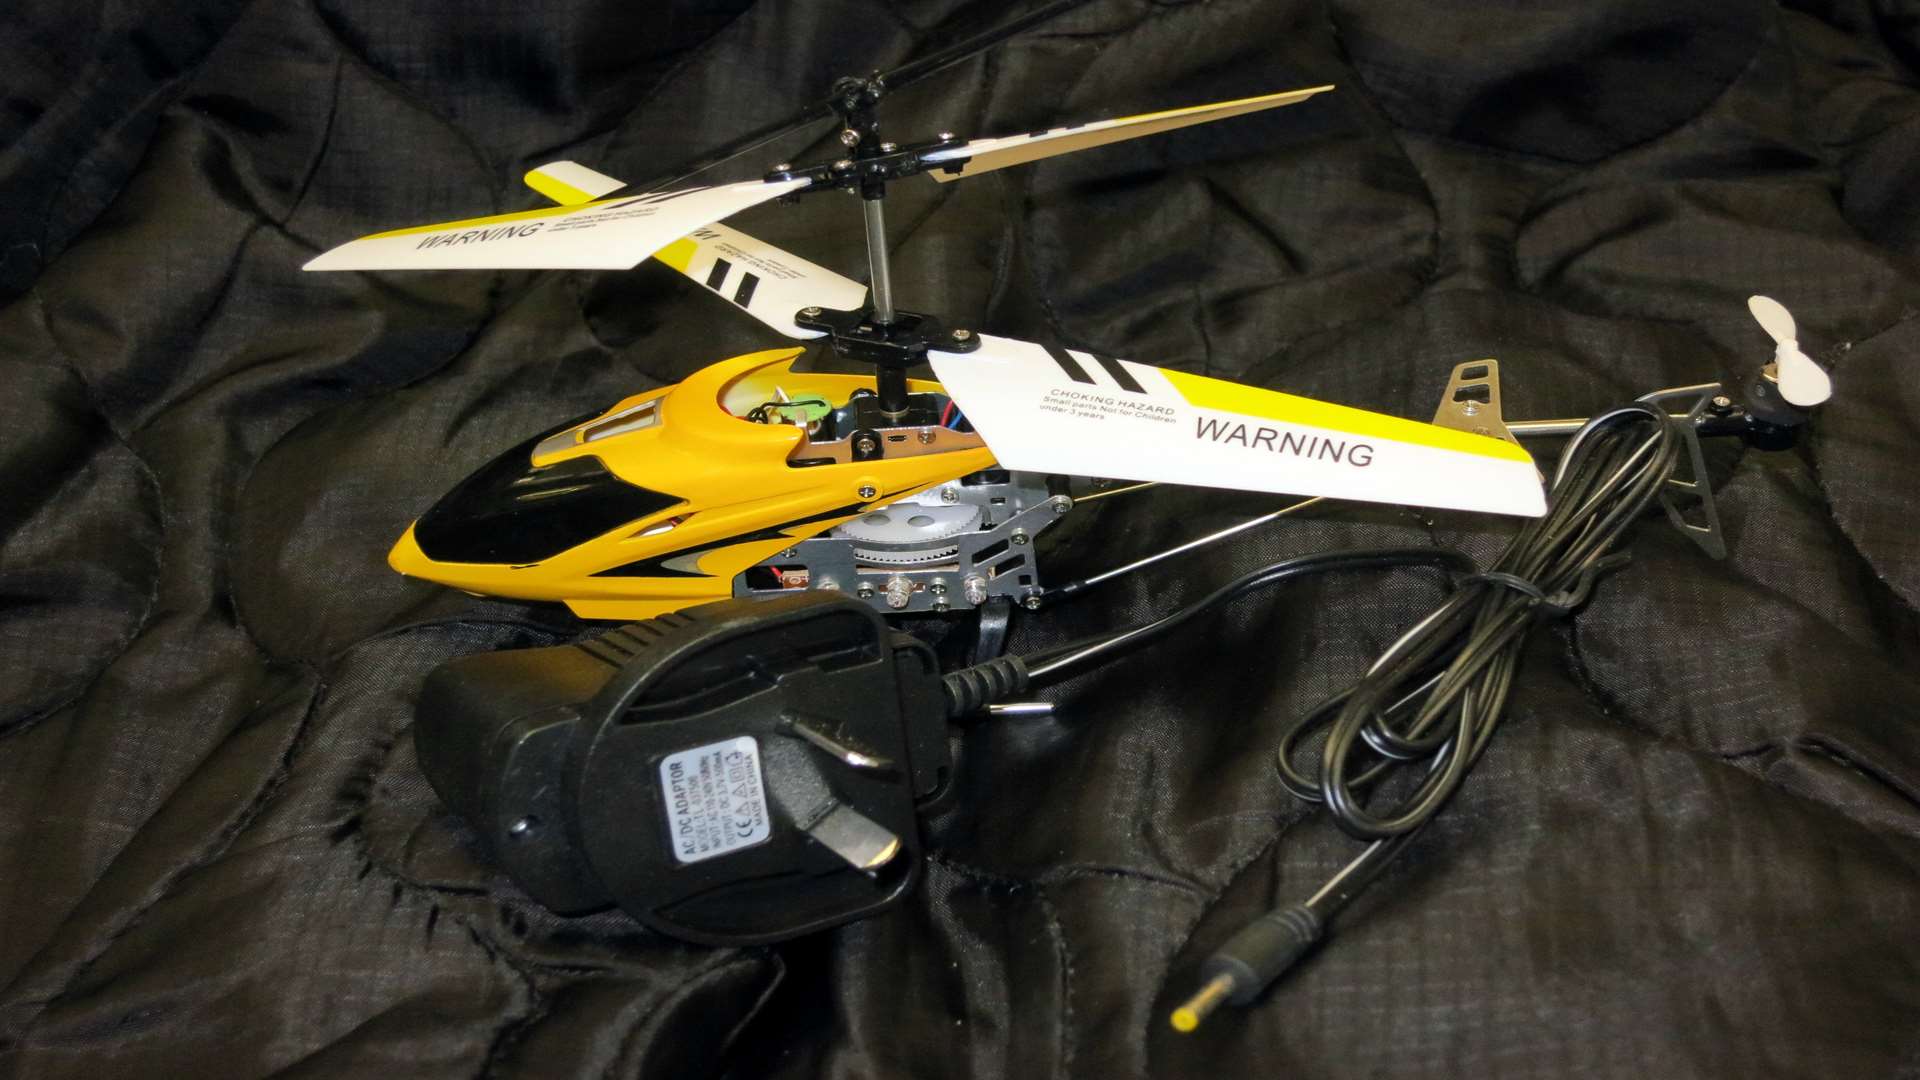 The potentially lethal toy helicopters were found on sale in Medway